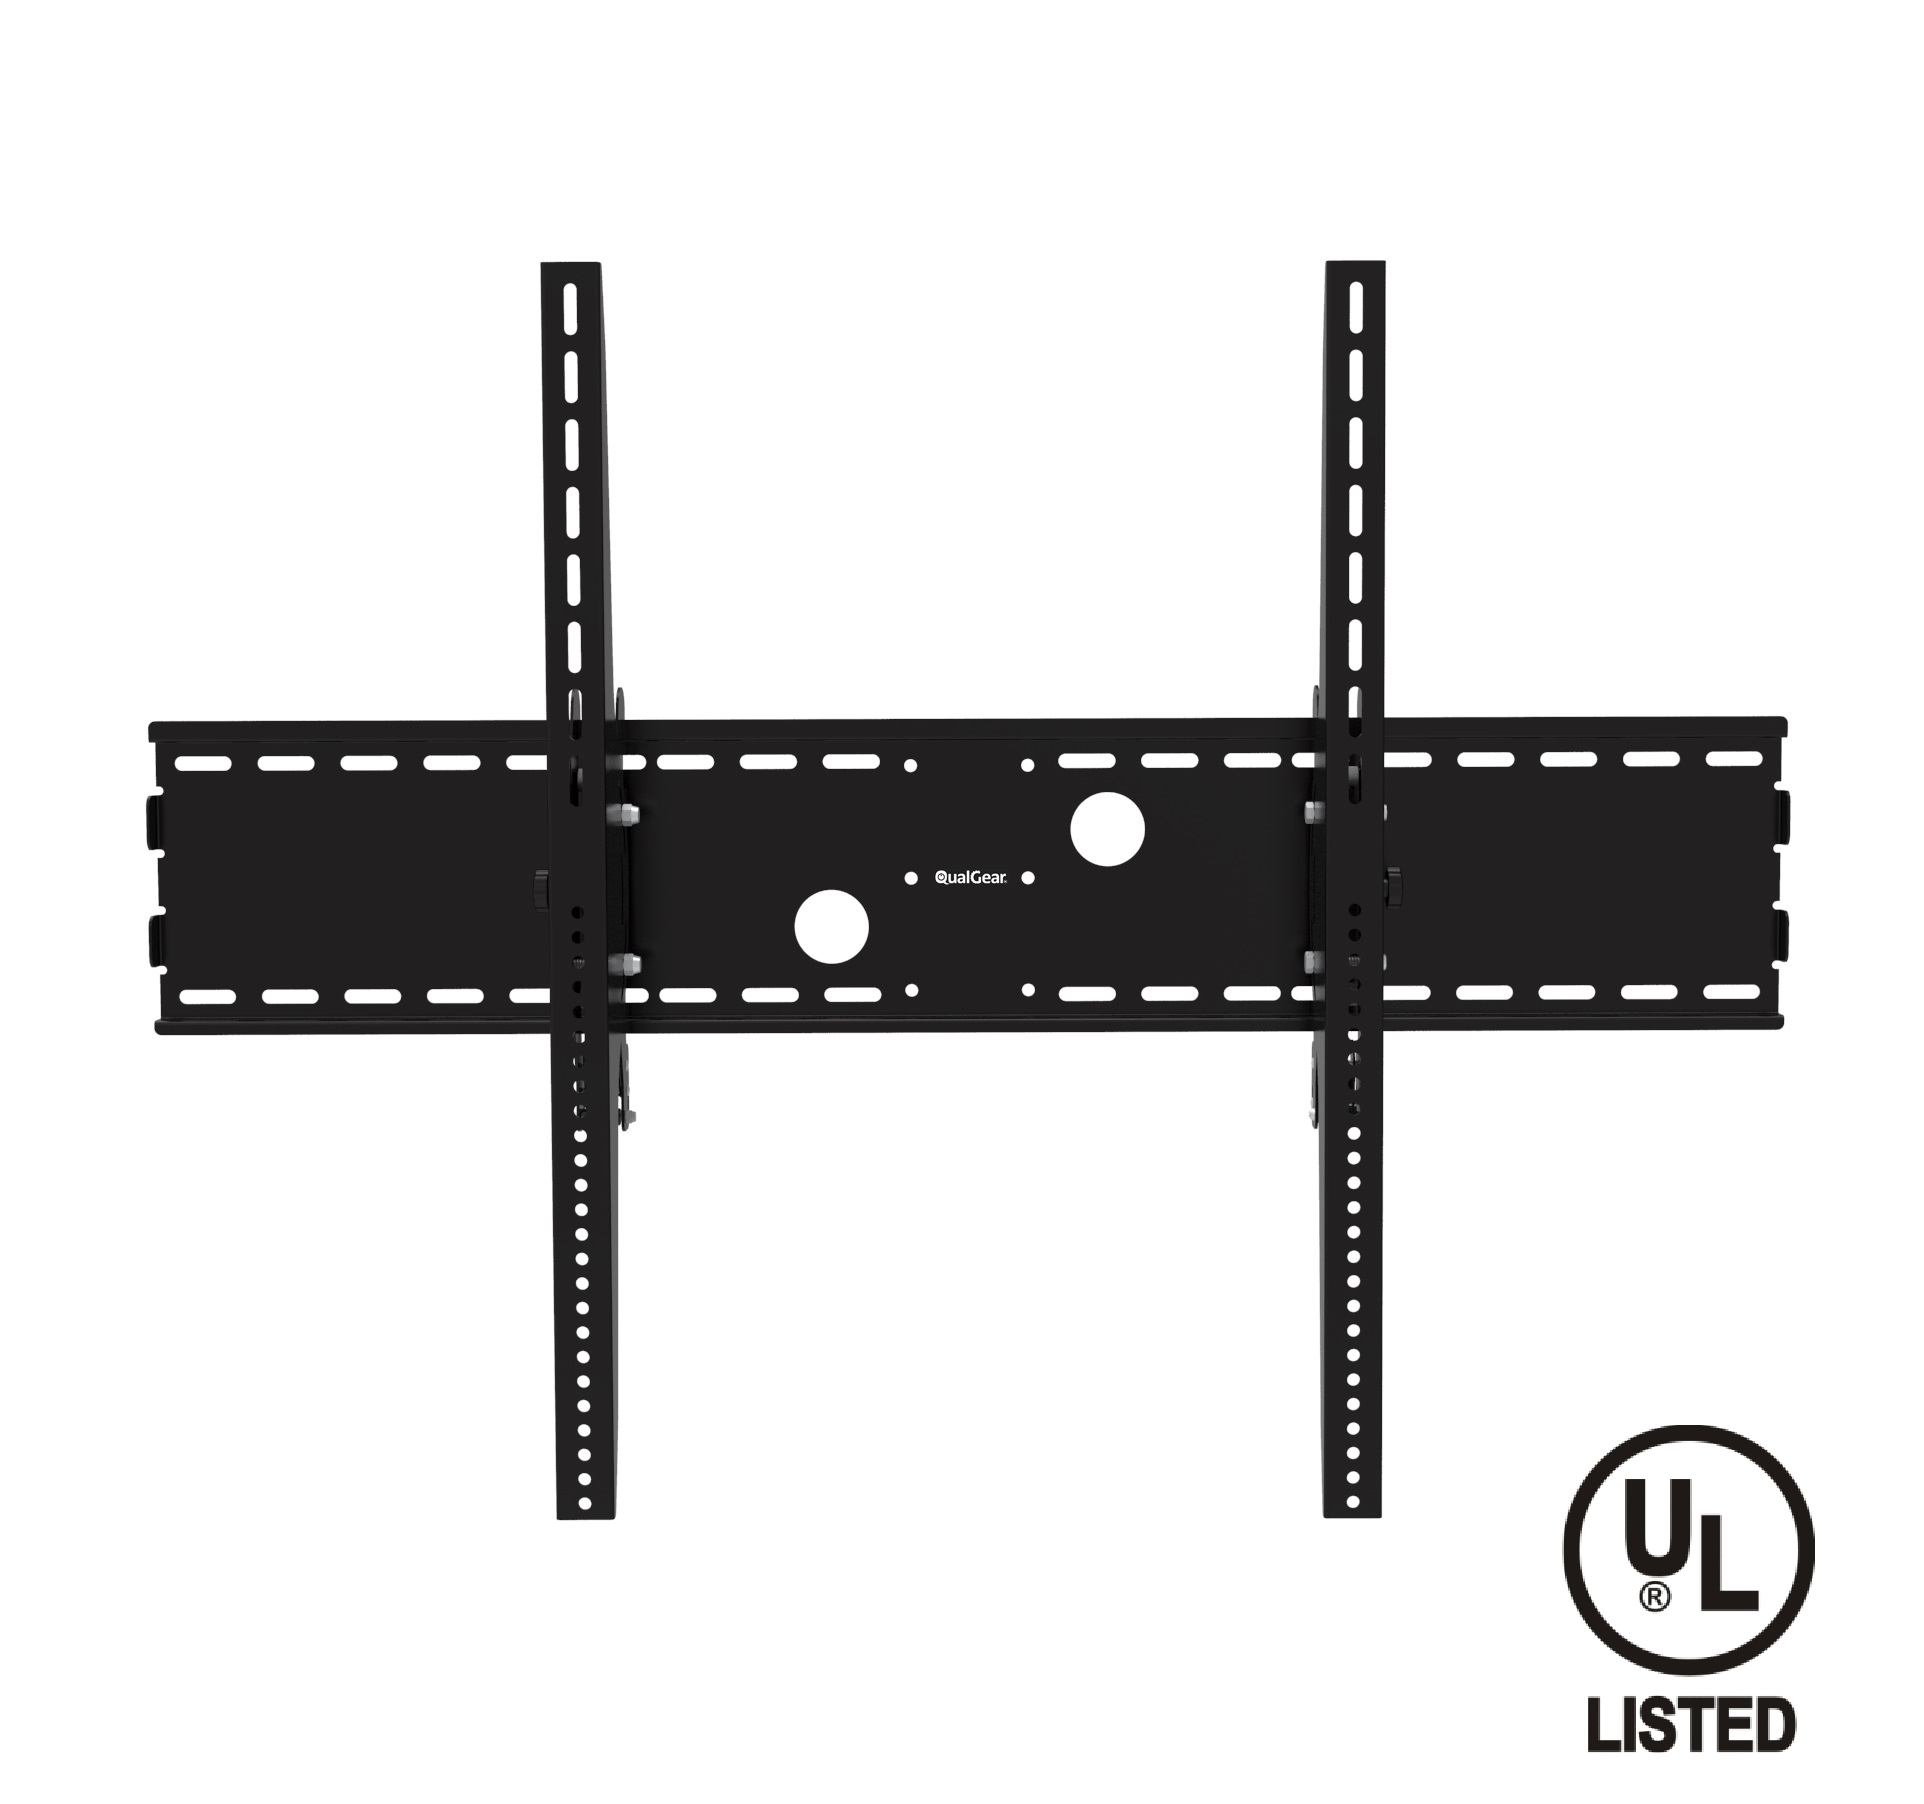 QualGear Heavy Duty Tilting TV Wall Mount For 60-100 Inch Flat Panel and Curved TVs, Black (QG-TM-091-BLK) [UL Listed]